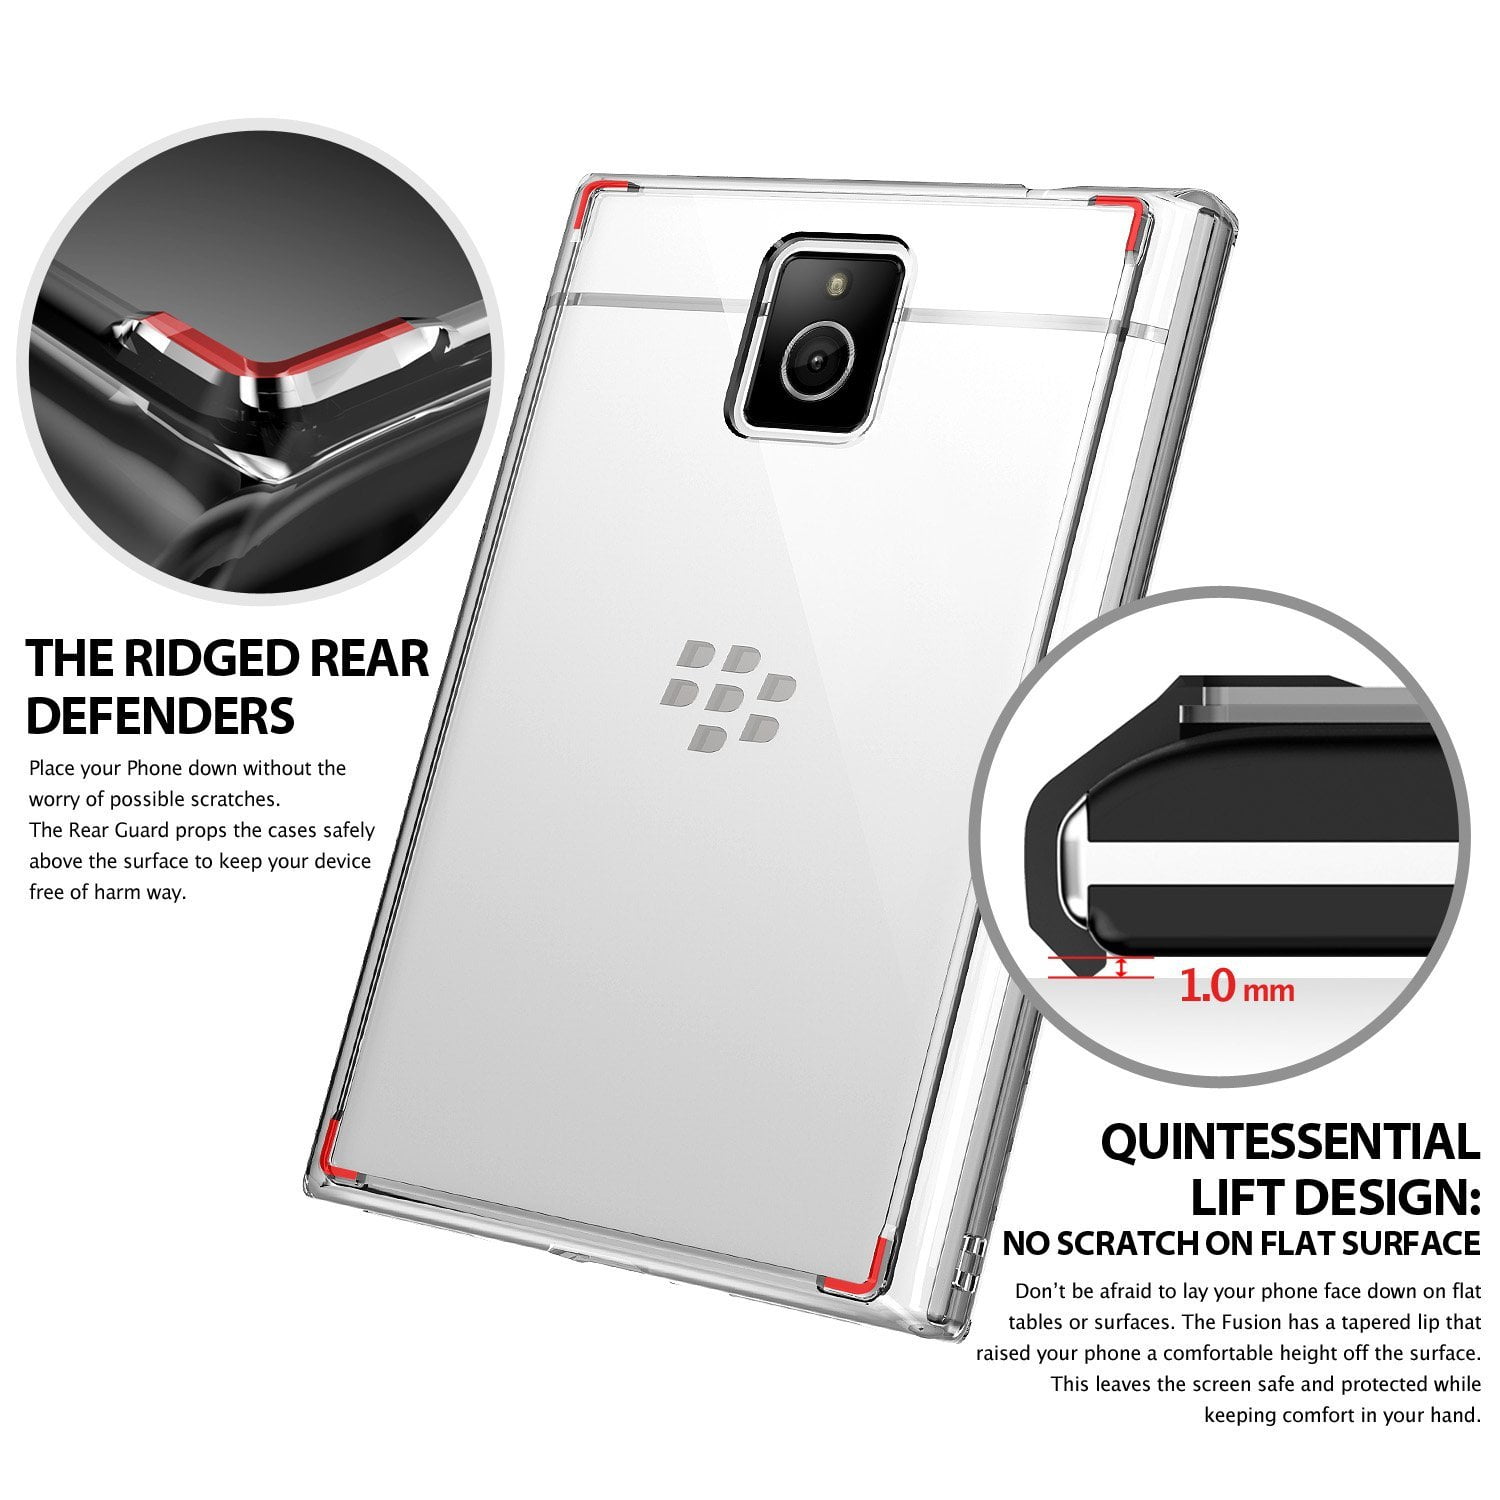 Ringke with BlackBerry Passport, Transparent PC Back TPU Bumper Drop Protection Phone Cover - Clear - Walmart.com